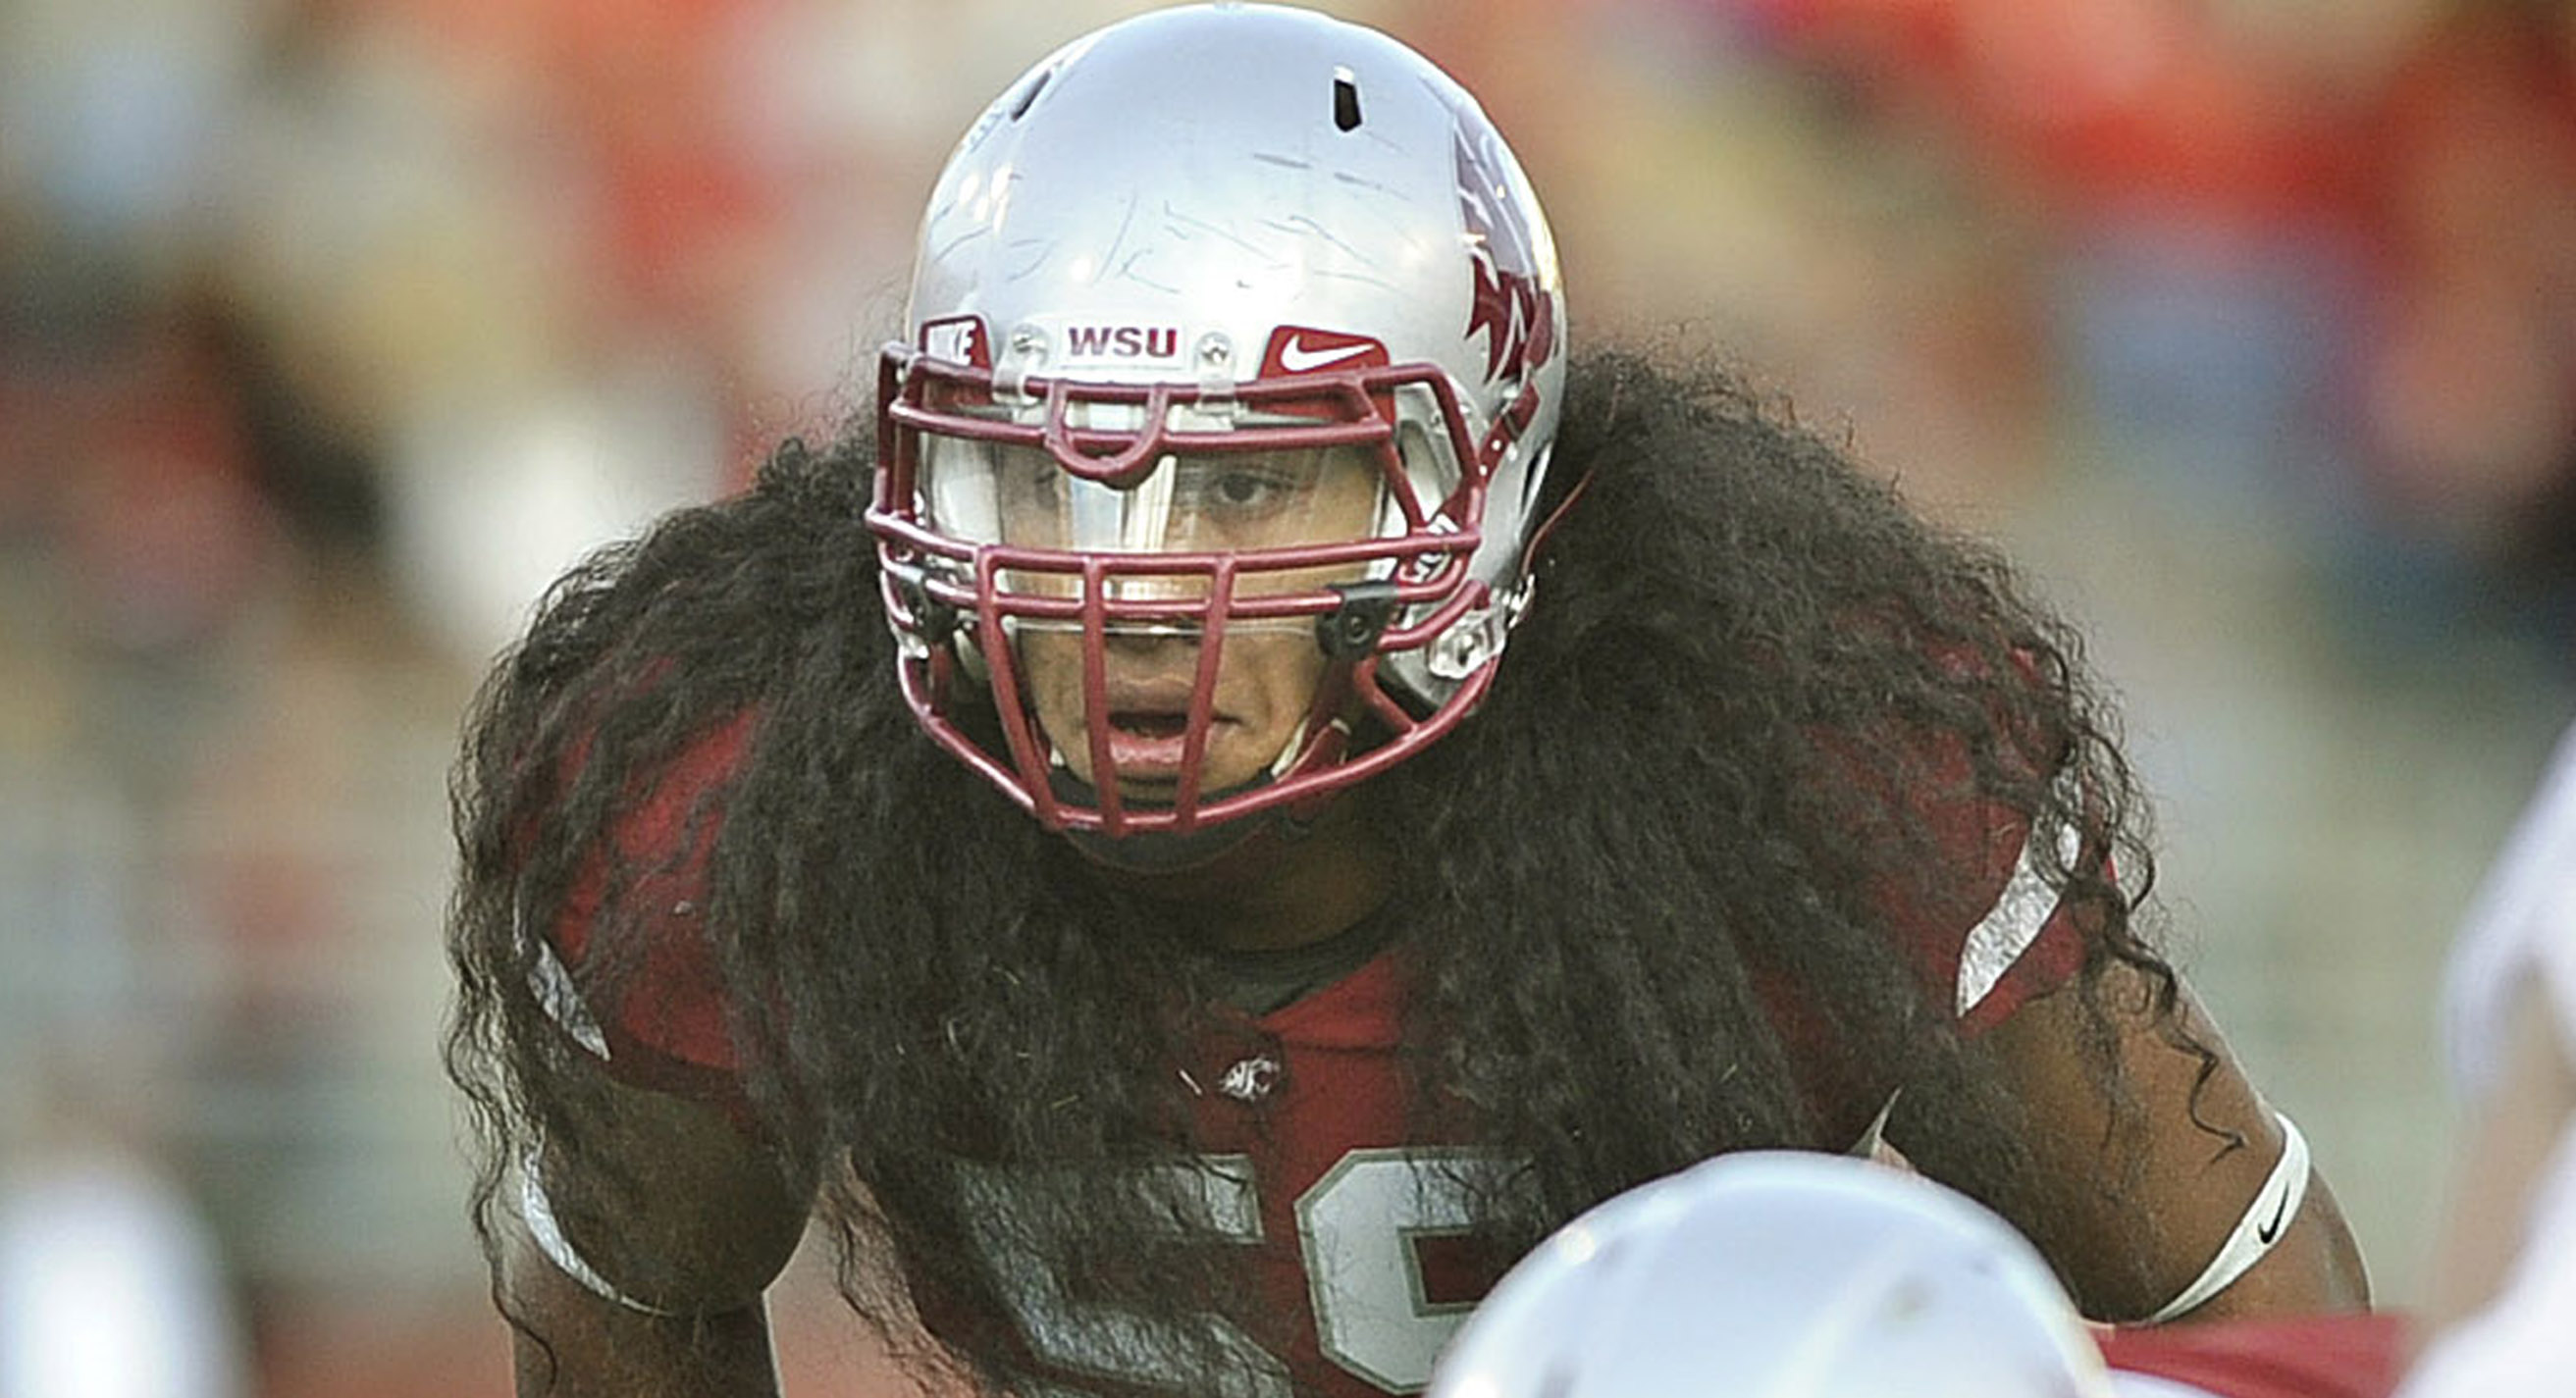 There's more to Sekope Kaufusi than hair | The Spokesman-Review